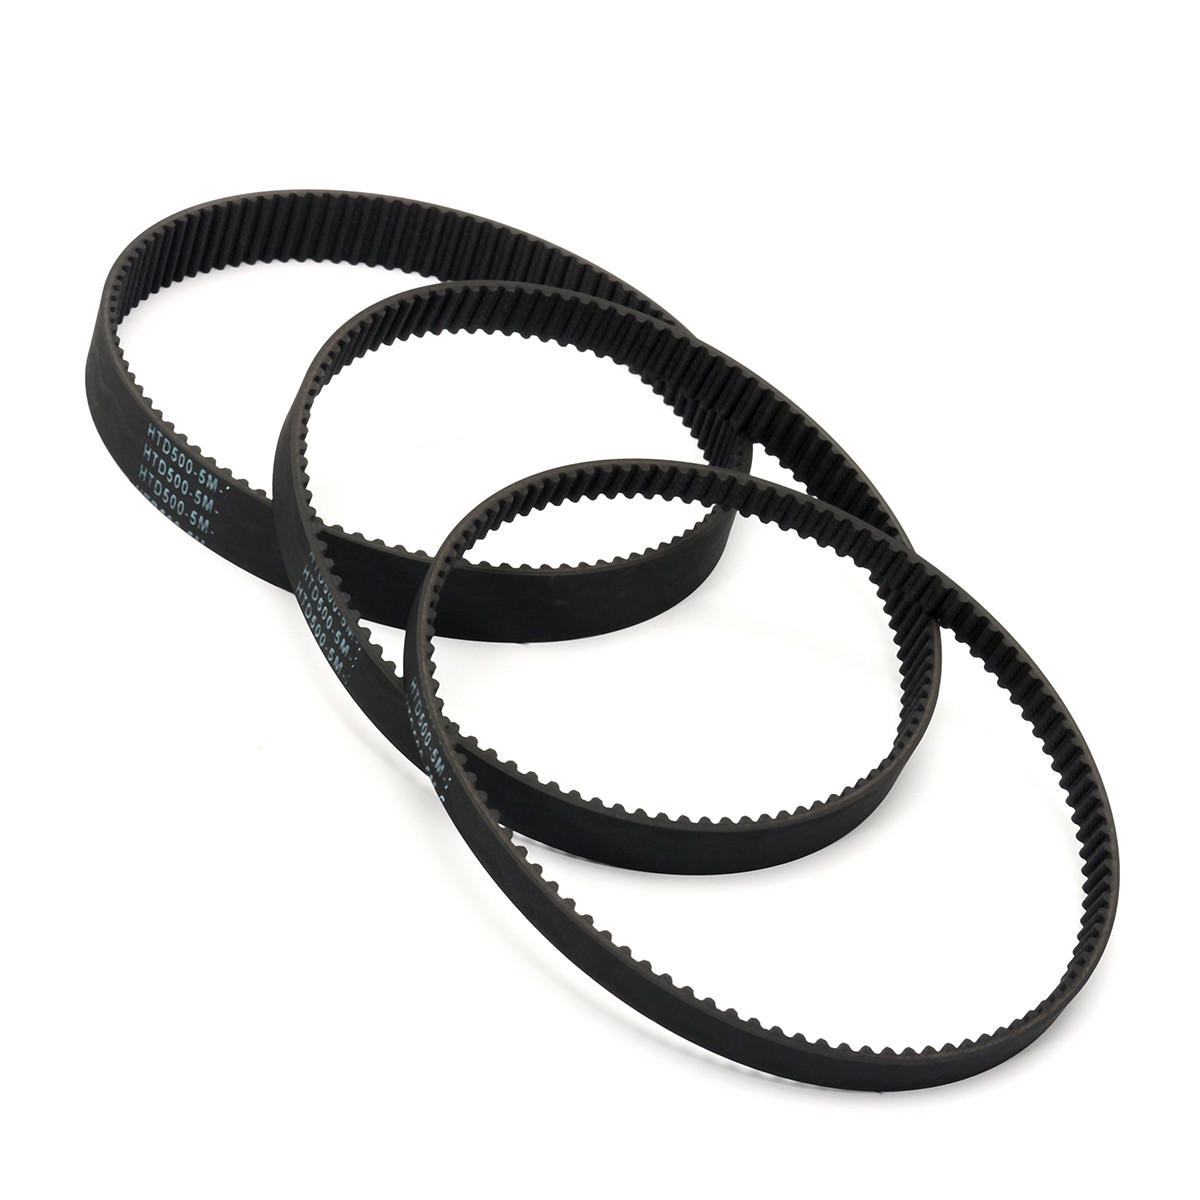 

HTD5M-500 Timing Belt Drive Rubber Arc Teeth 10/15/20mm Width 1/5'' Pitch For 3D Printer